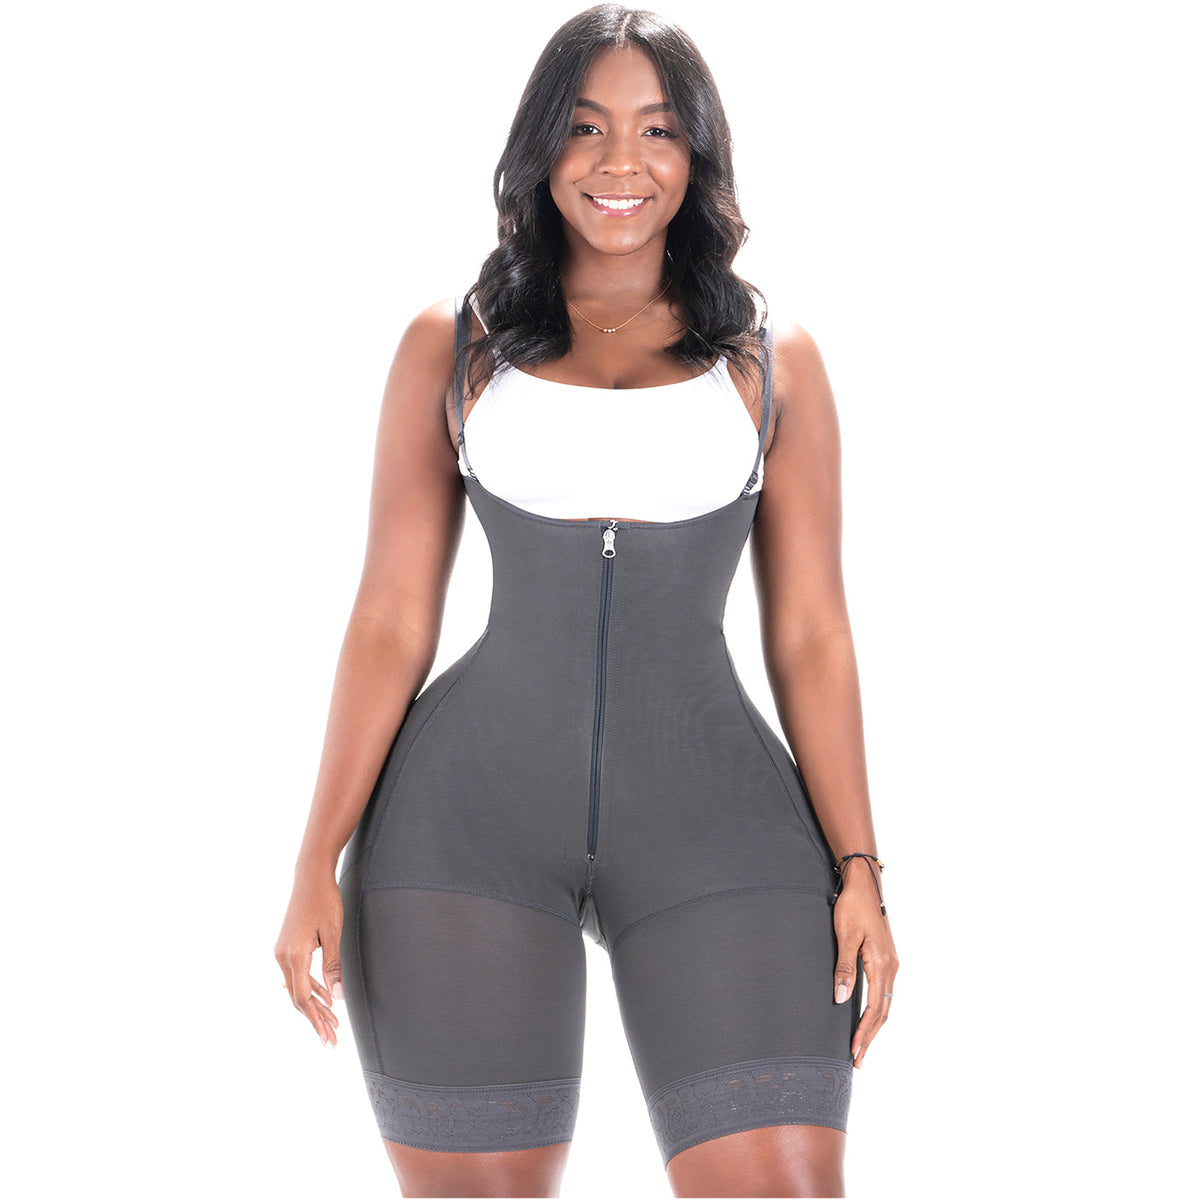 Find Cheap, Fashionable and Slimming body shaper fabric 